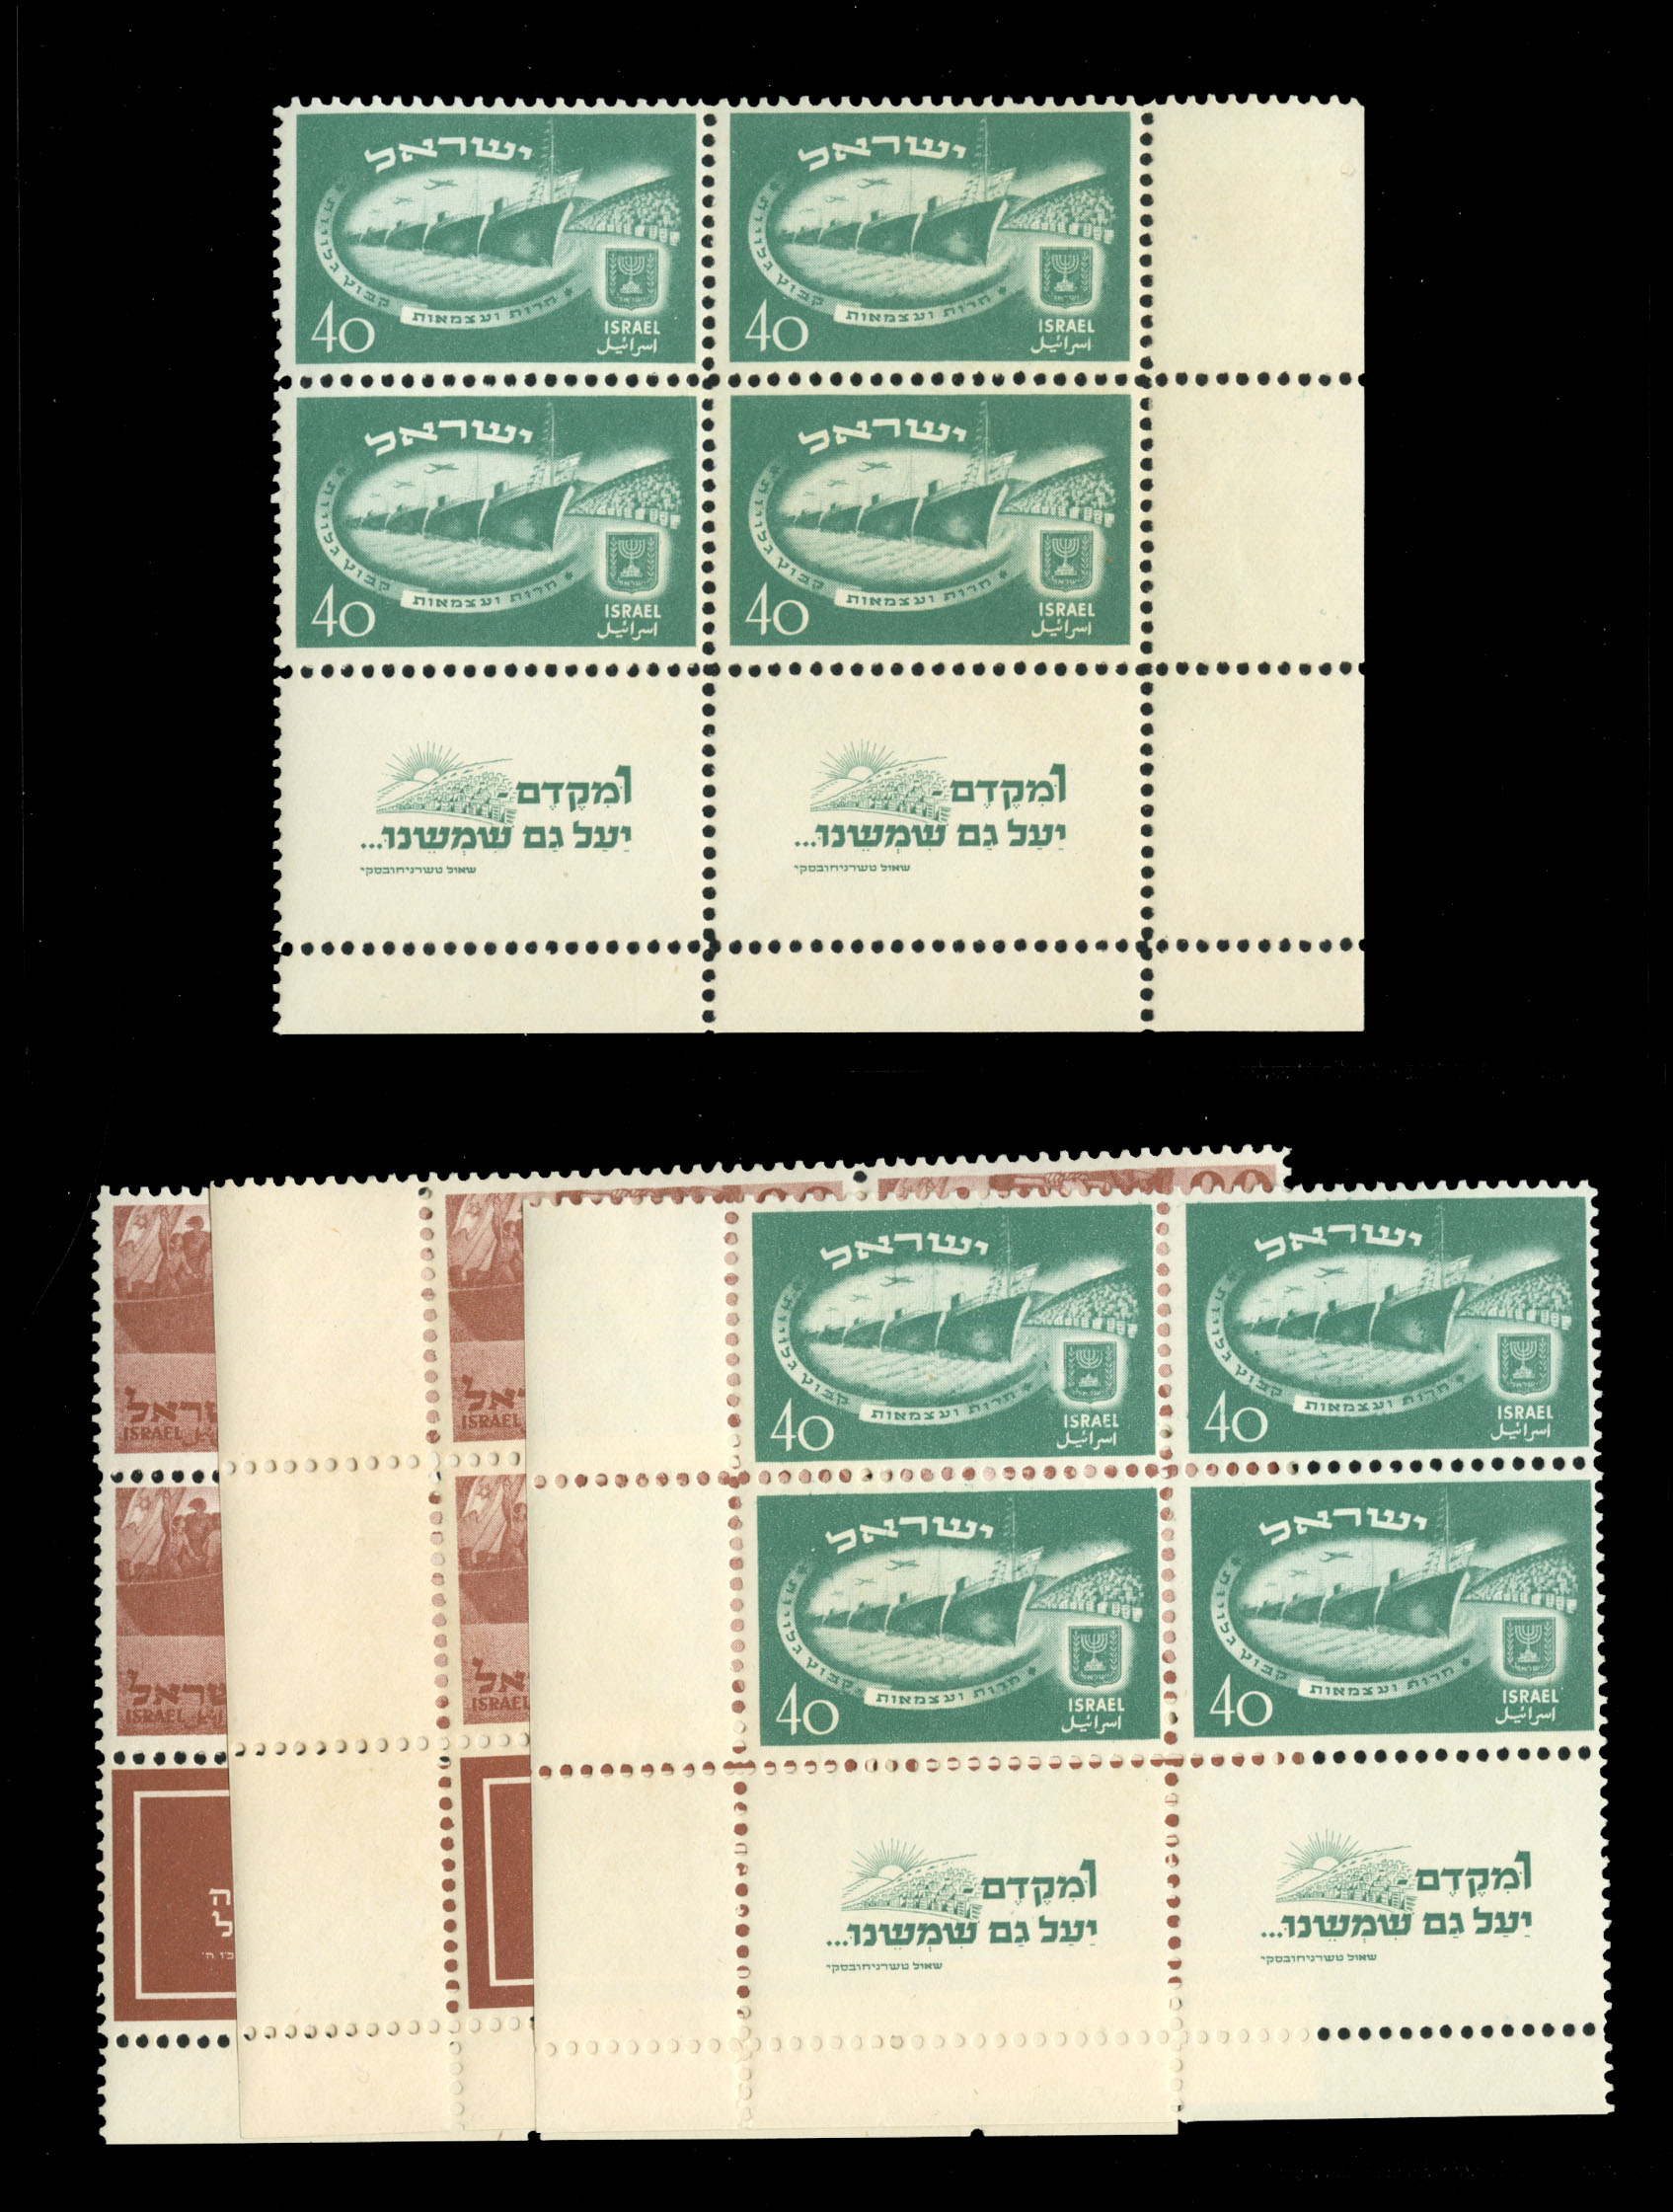 Lot 981 - BRITISH COMMONWEALTH SOUTH AFRICA - Transvaal  -  Cherrystone Auctions Rare Stamps & Postal History of the World